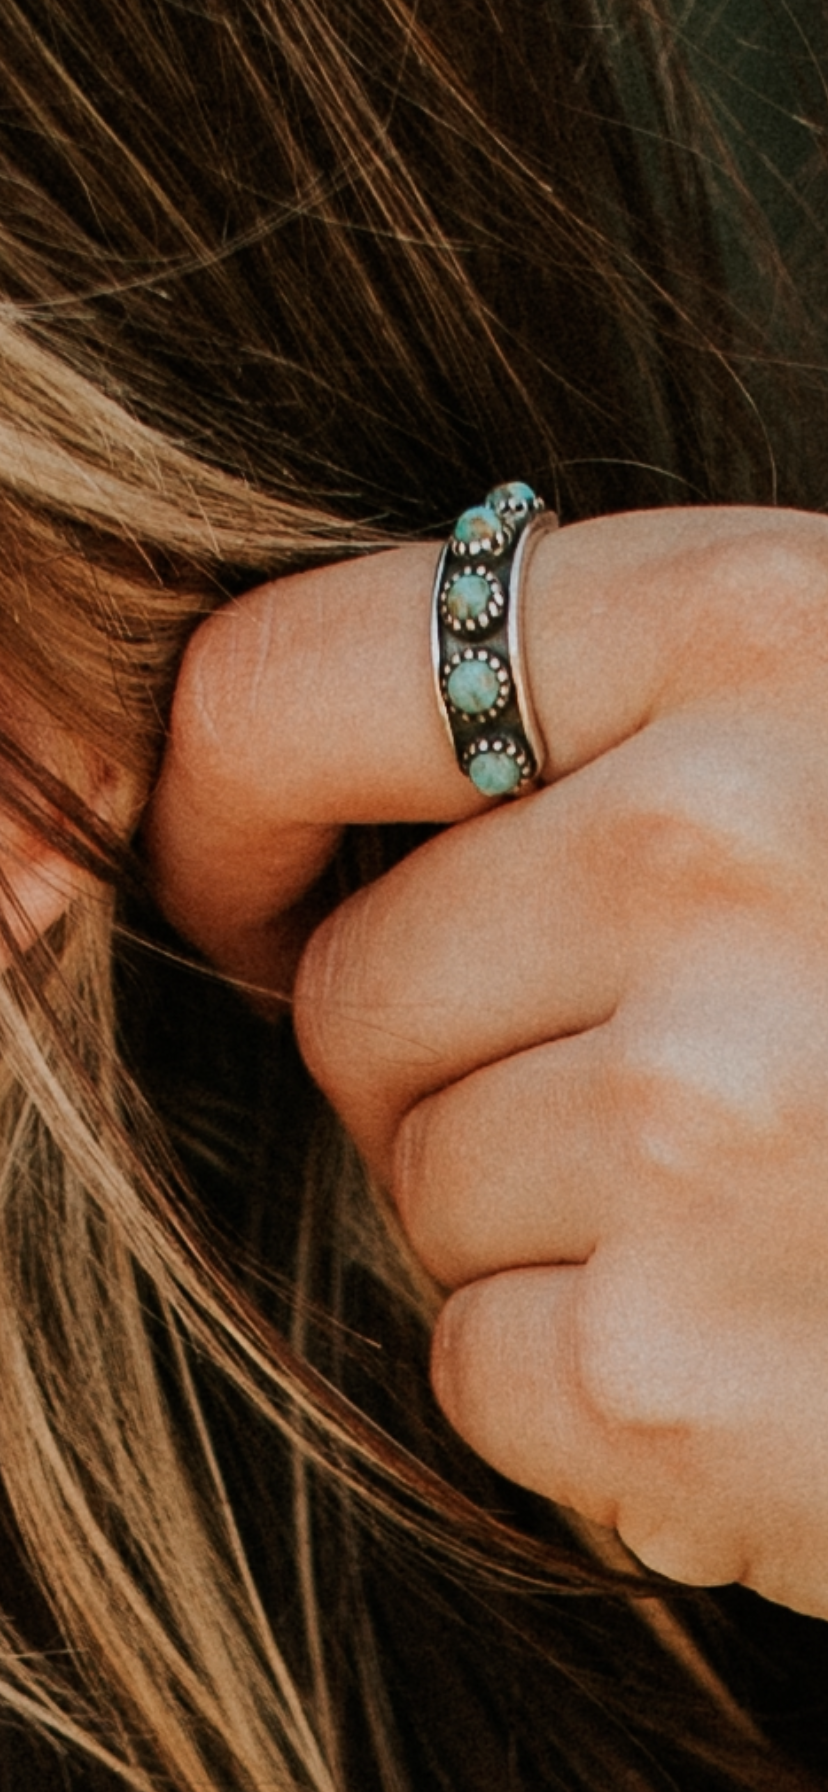 The Turquoise Breeze Ring